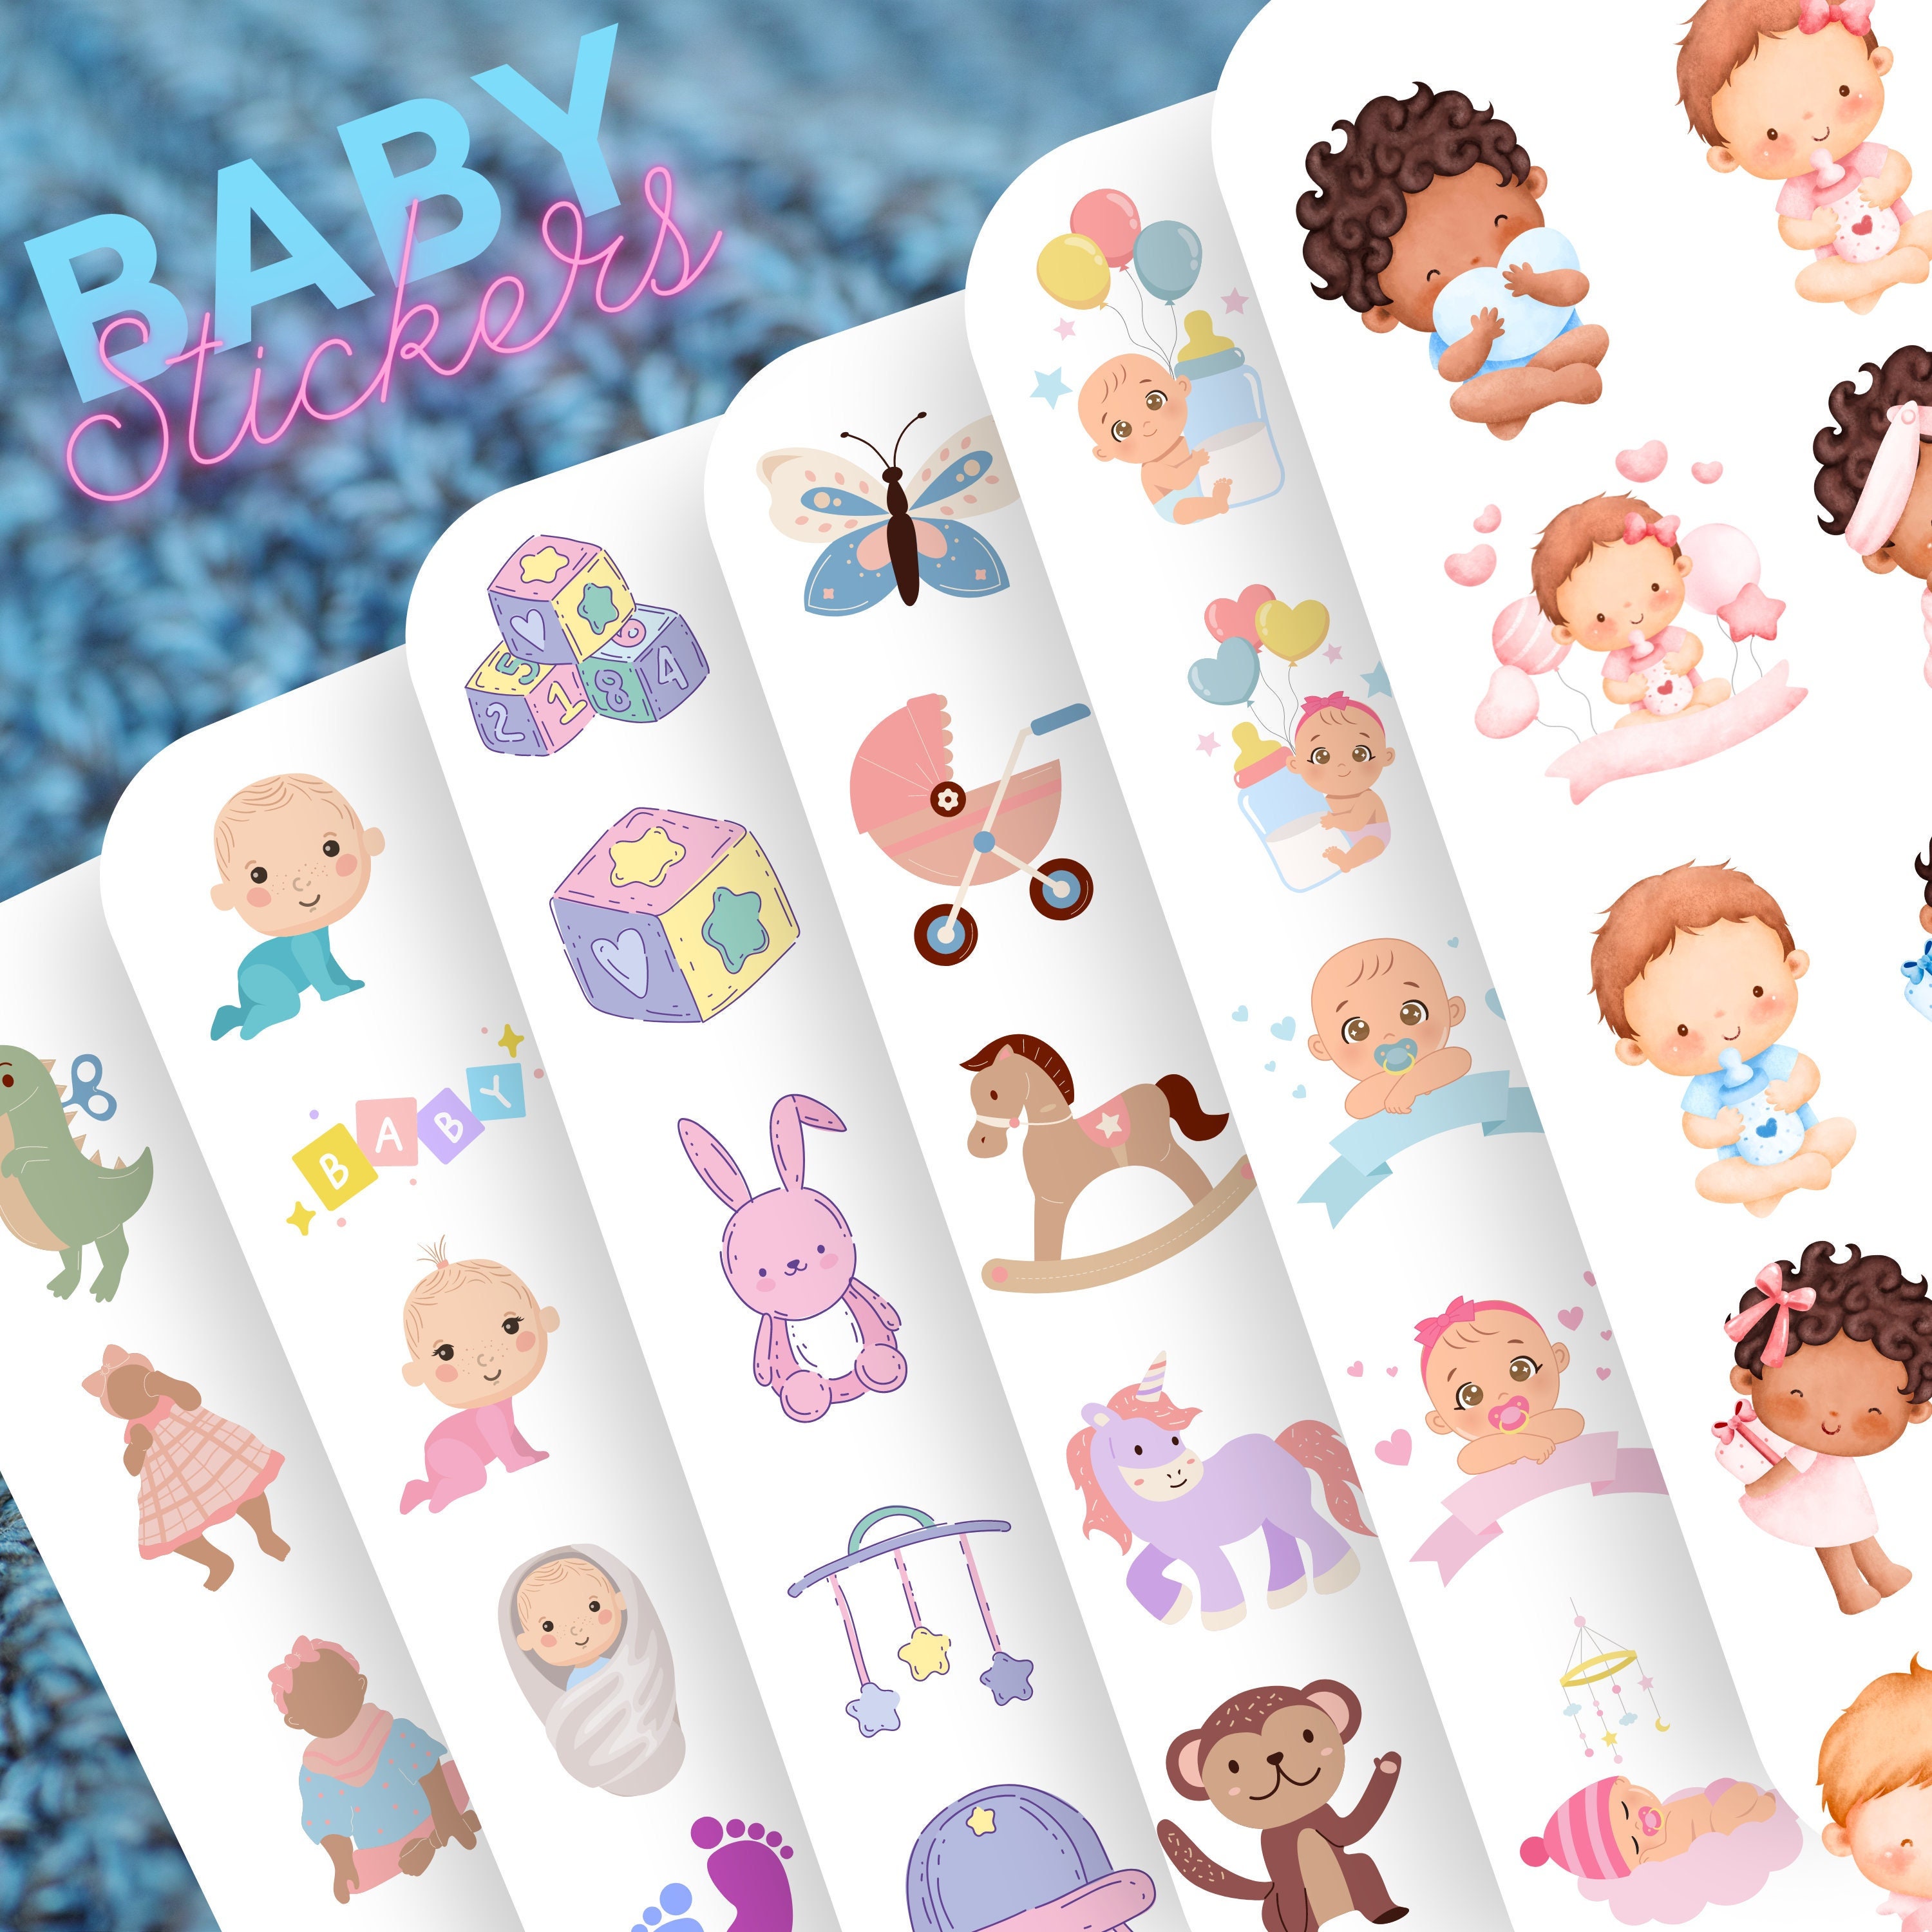 Baby Boy Sticker Sheets for Scrapbooking and Journaling, 47 Pcs Newborn Baby  Stickers for Scrapbooking, Blue Stickers, Party Stickers Pack -  Hong  Kong